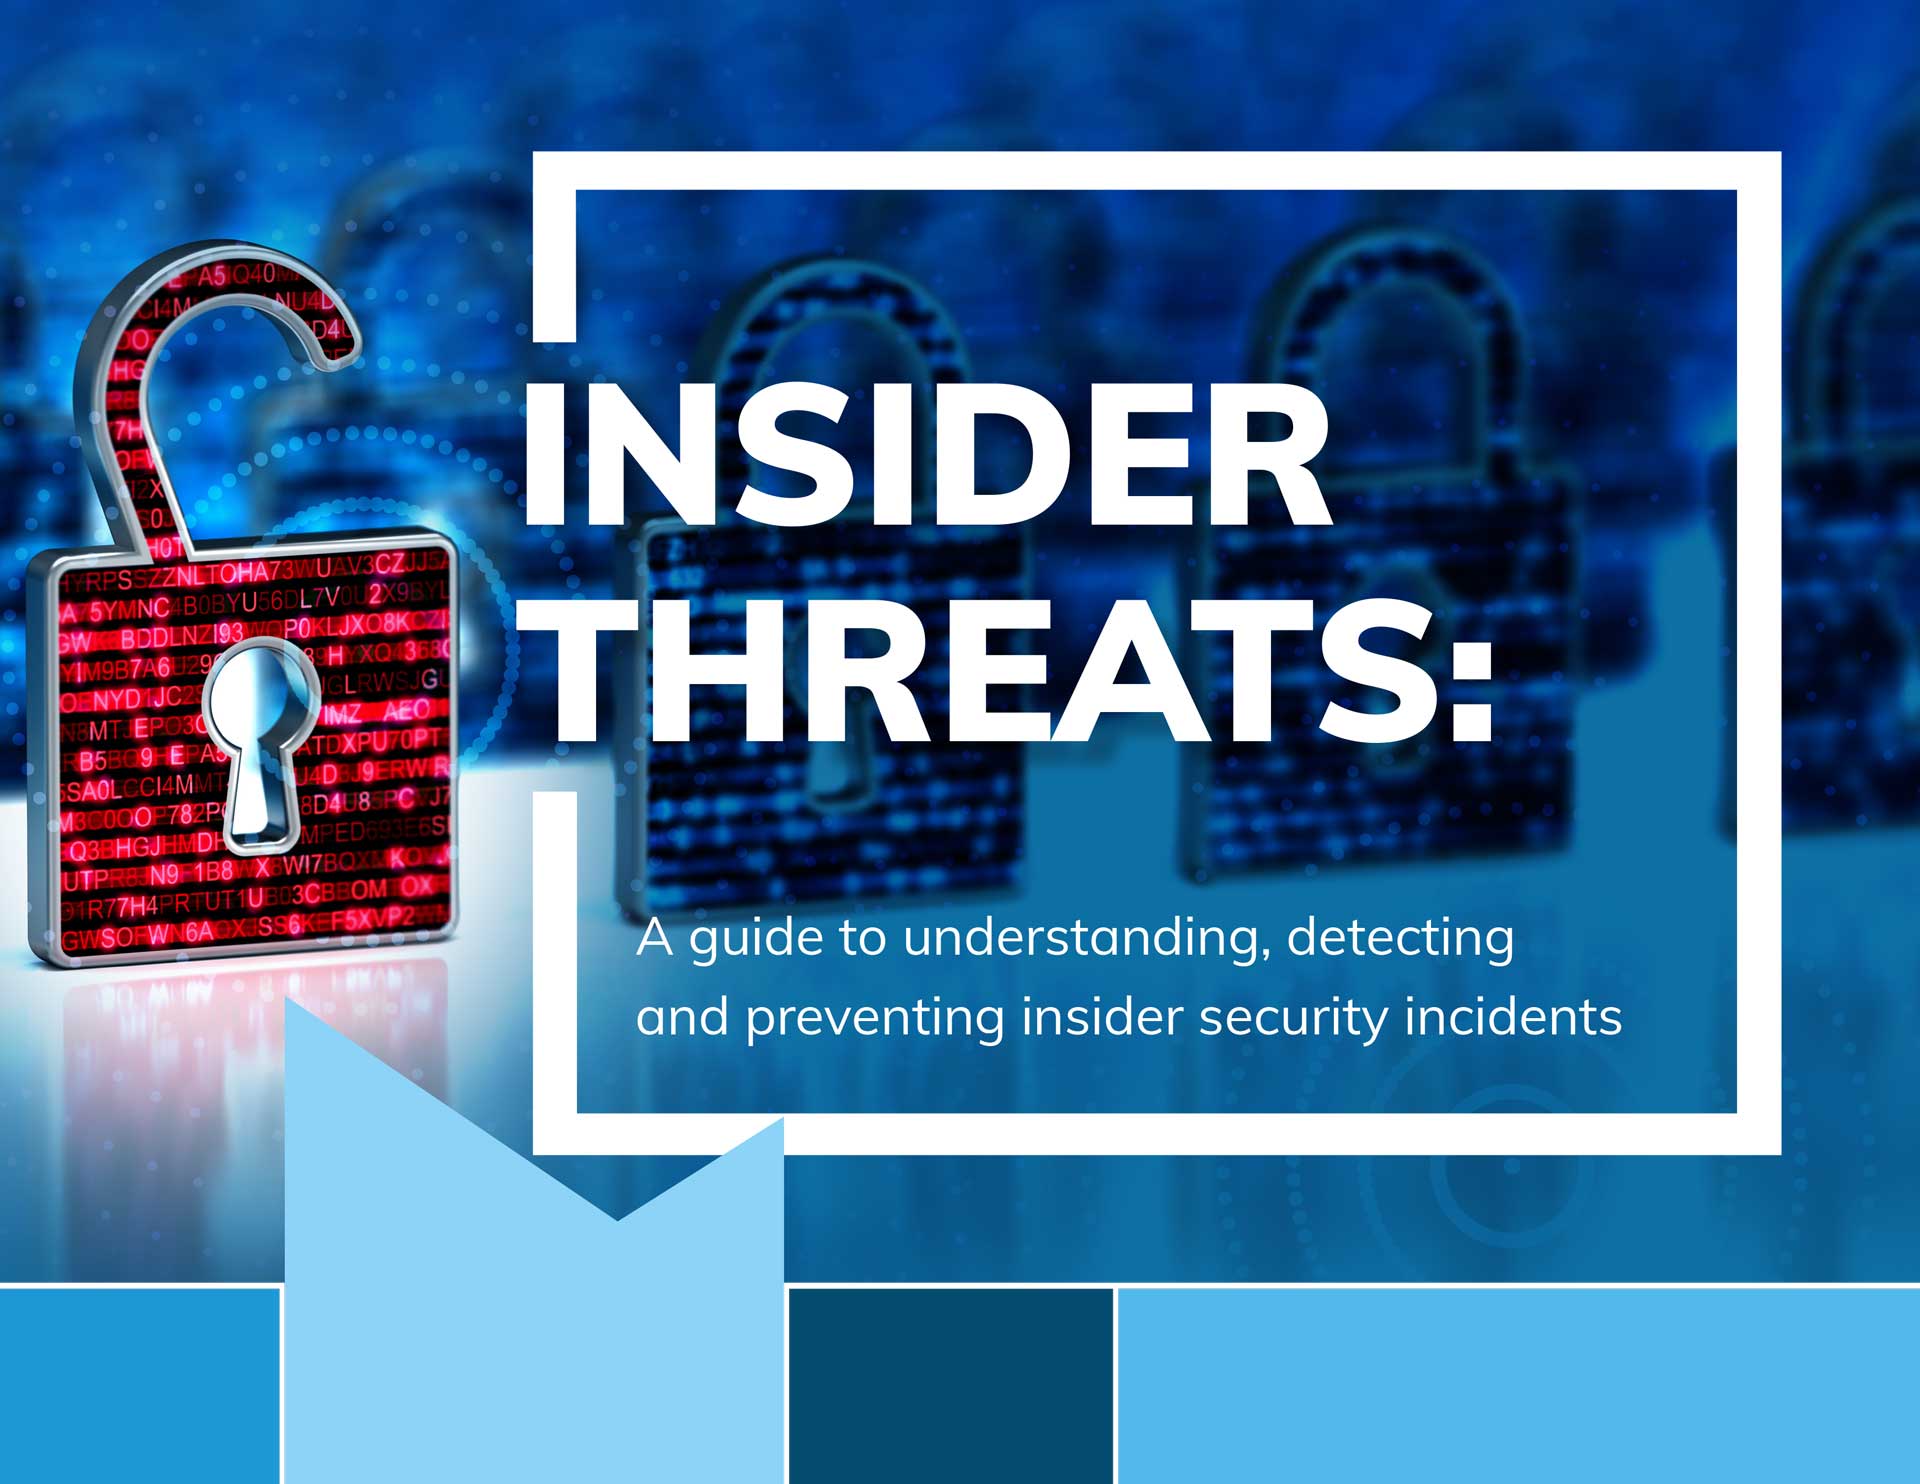 Insider Threats: A guide to understanding, detecting and preventing insider security threats.